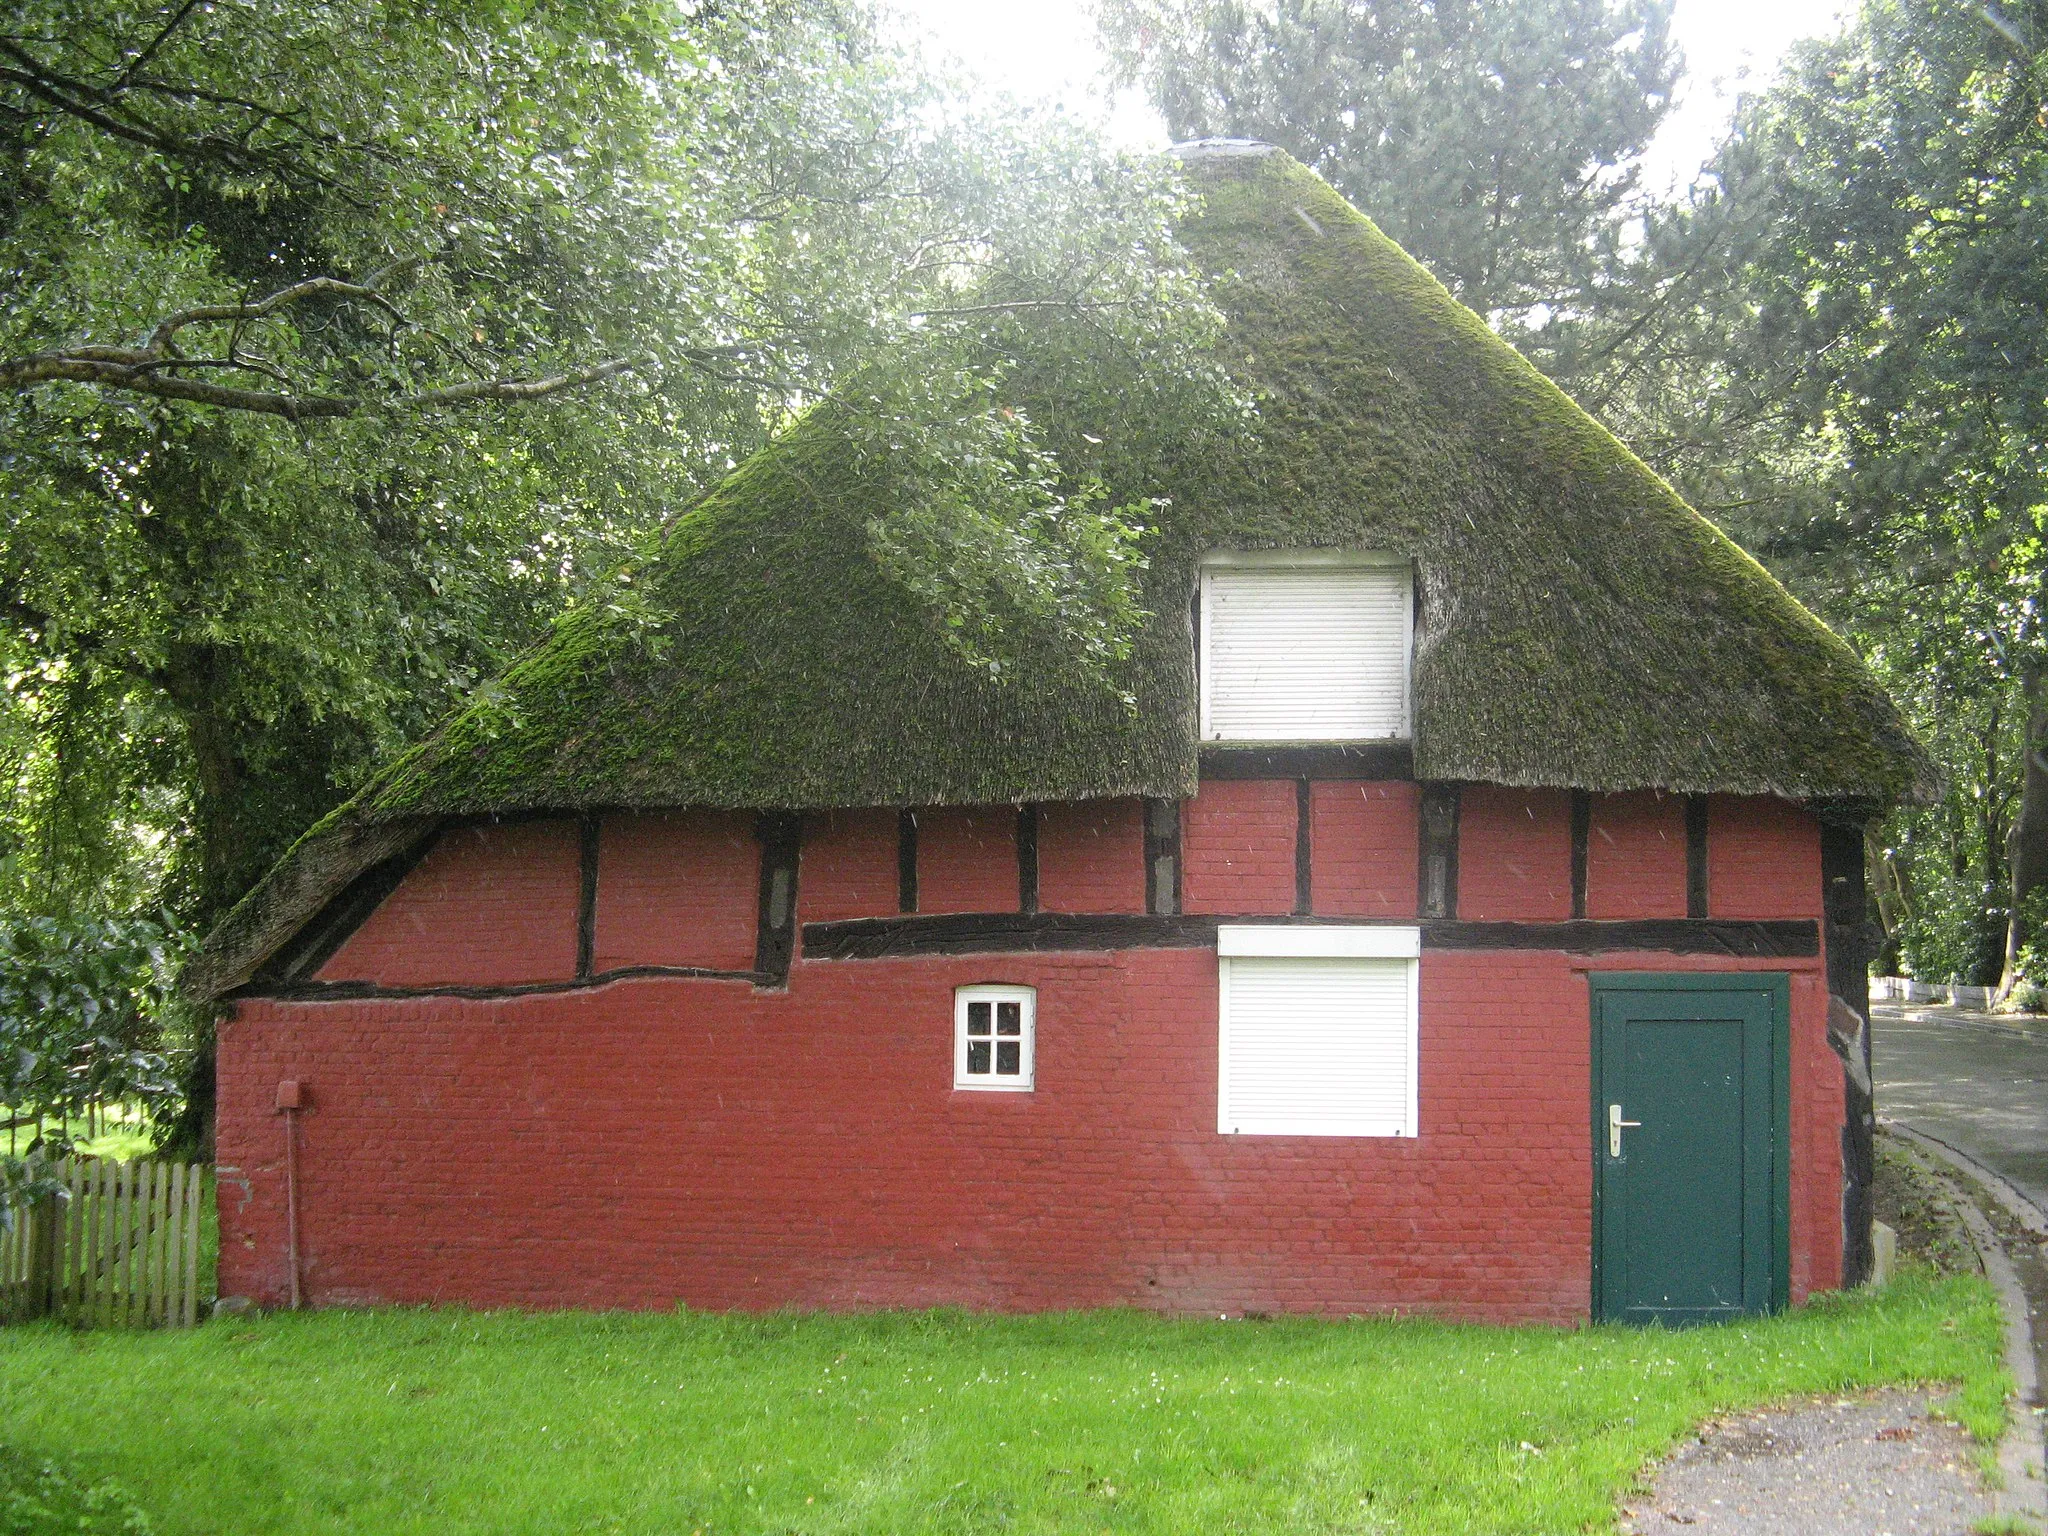 Photo showing: "To Osten 6" one of the oldest houses in Dihmarschen in hemmingstedt